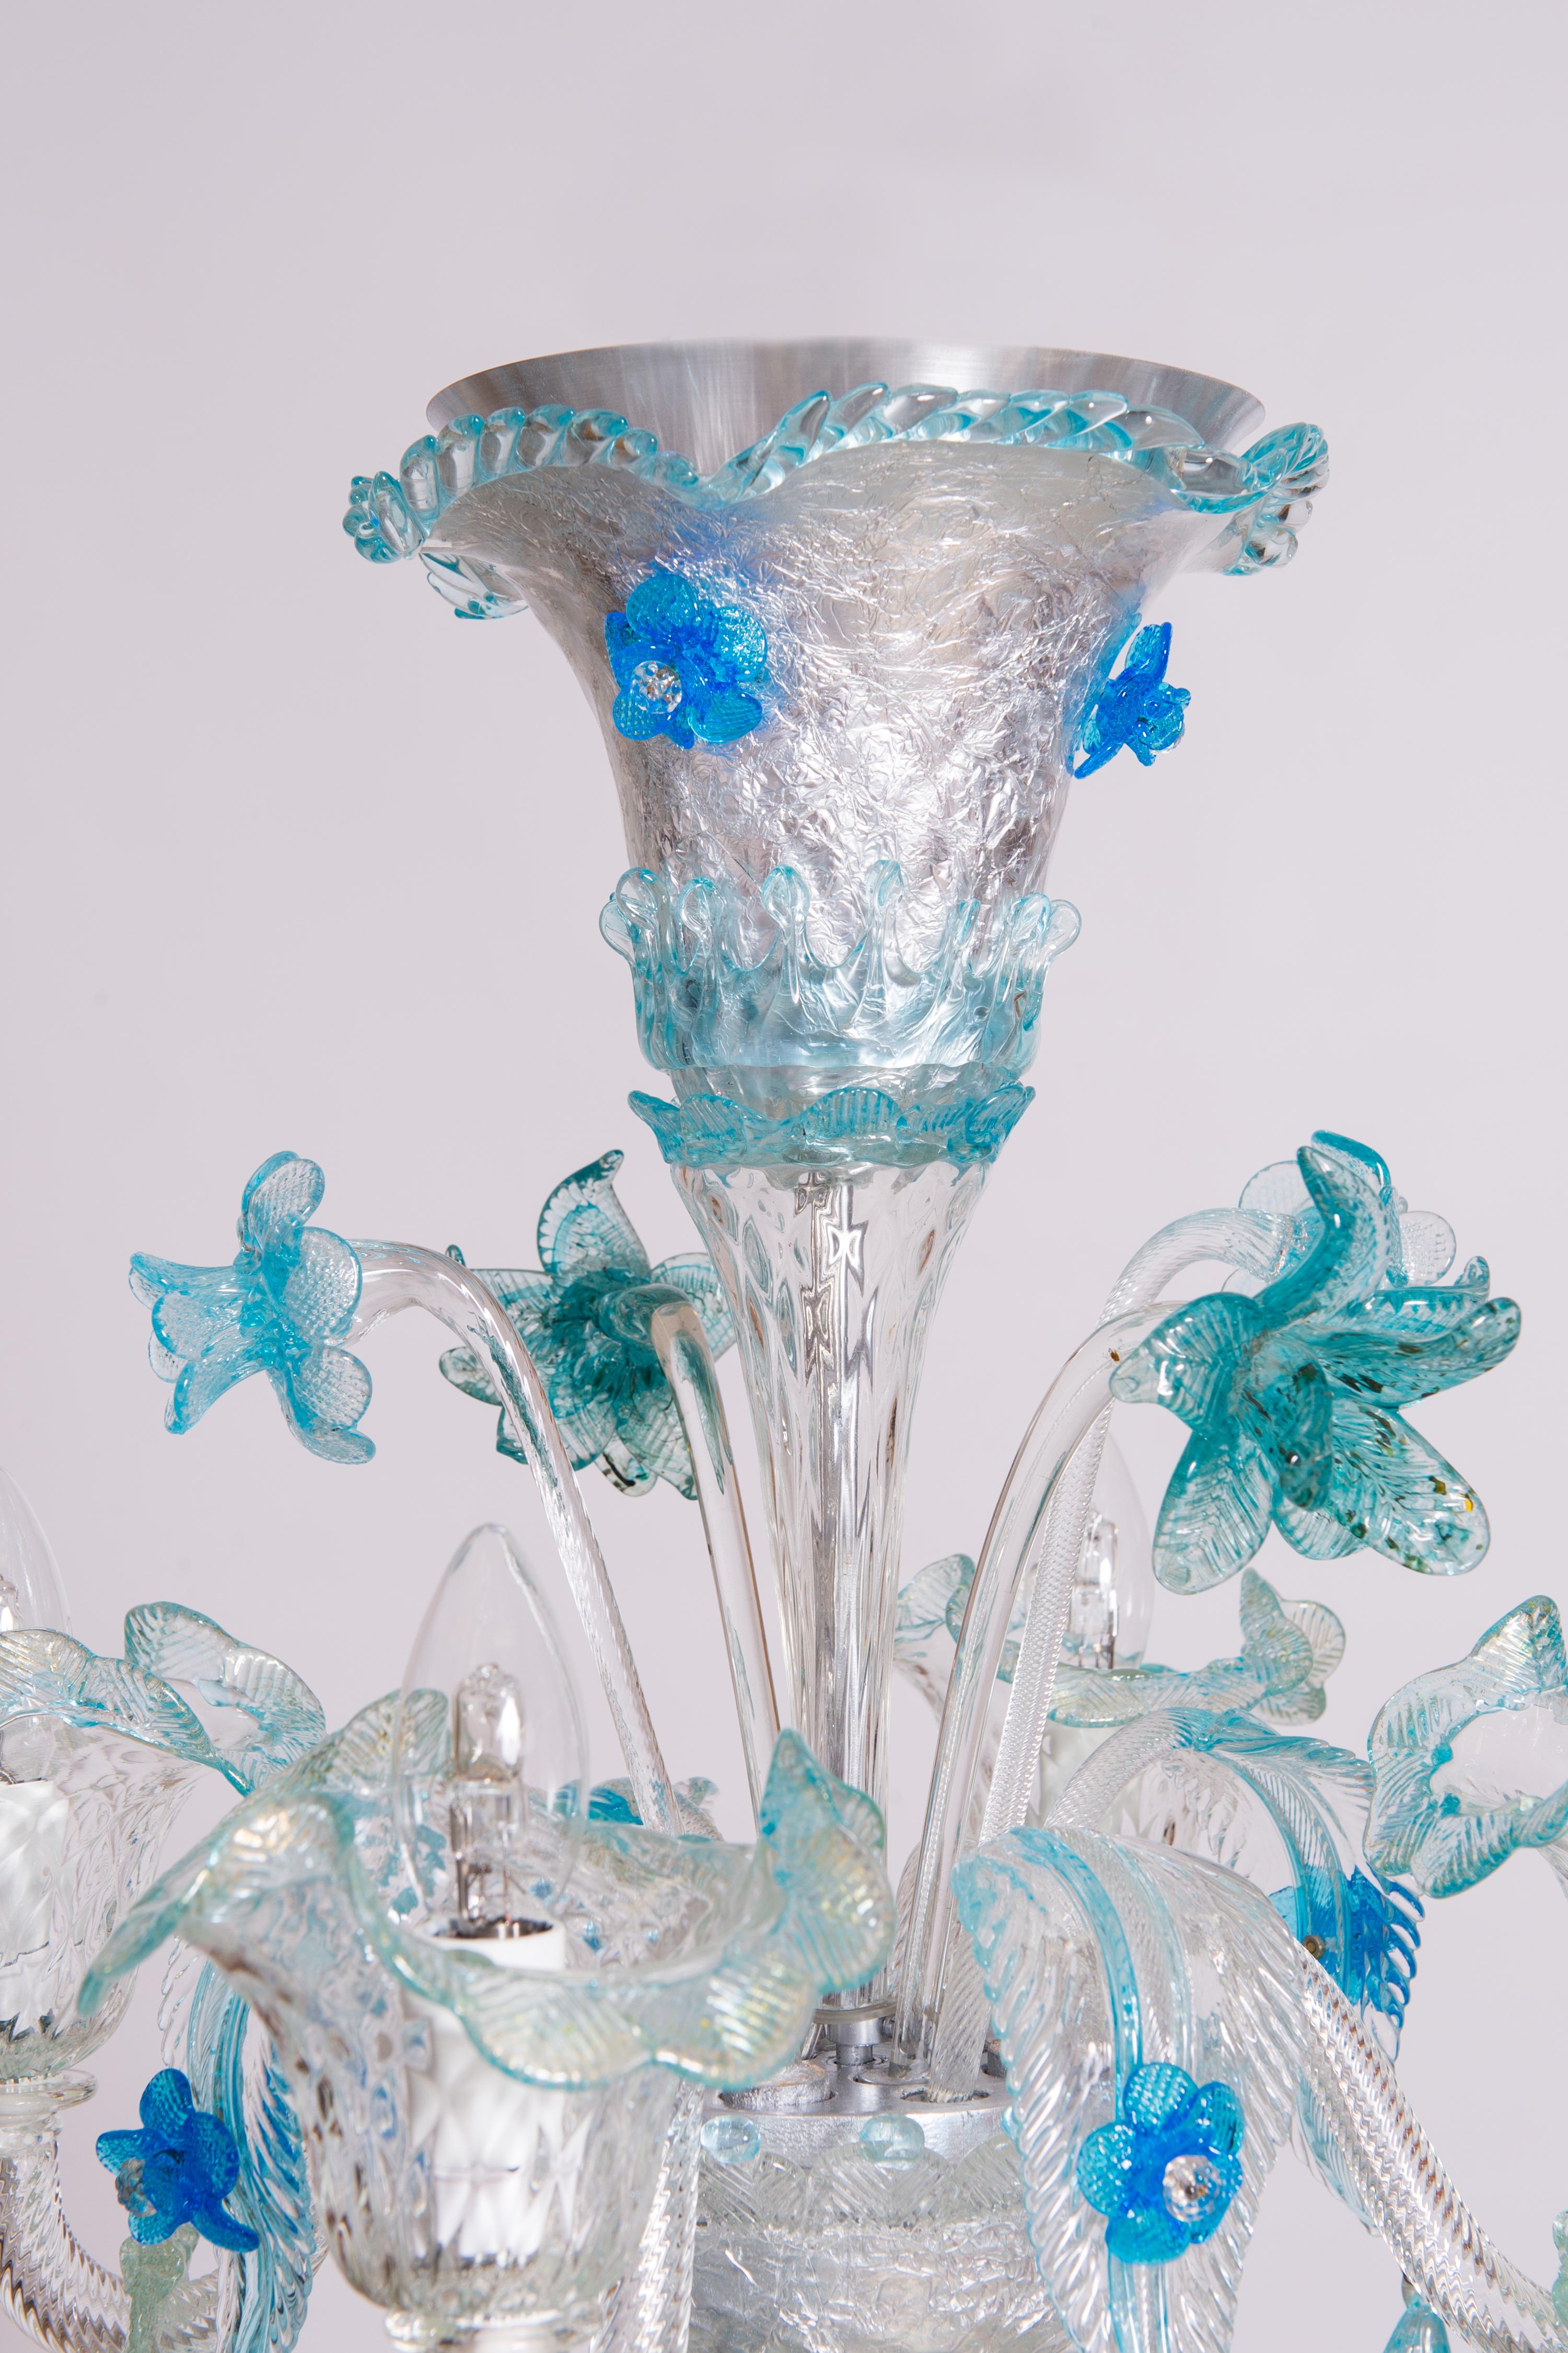 Double Tiered Murano Glass Chandelier in vivid Blue Floral Patterns 1990s Italy For Sale 9